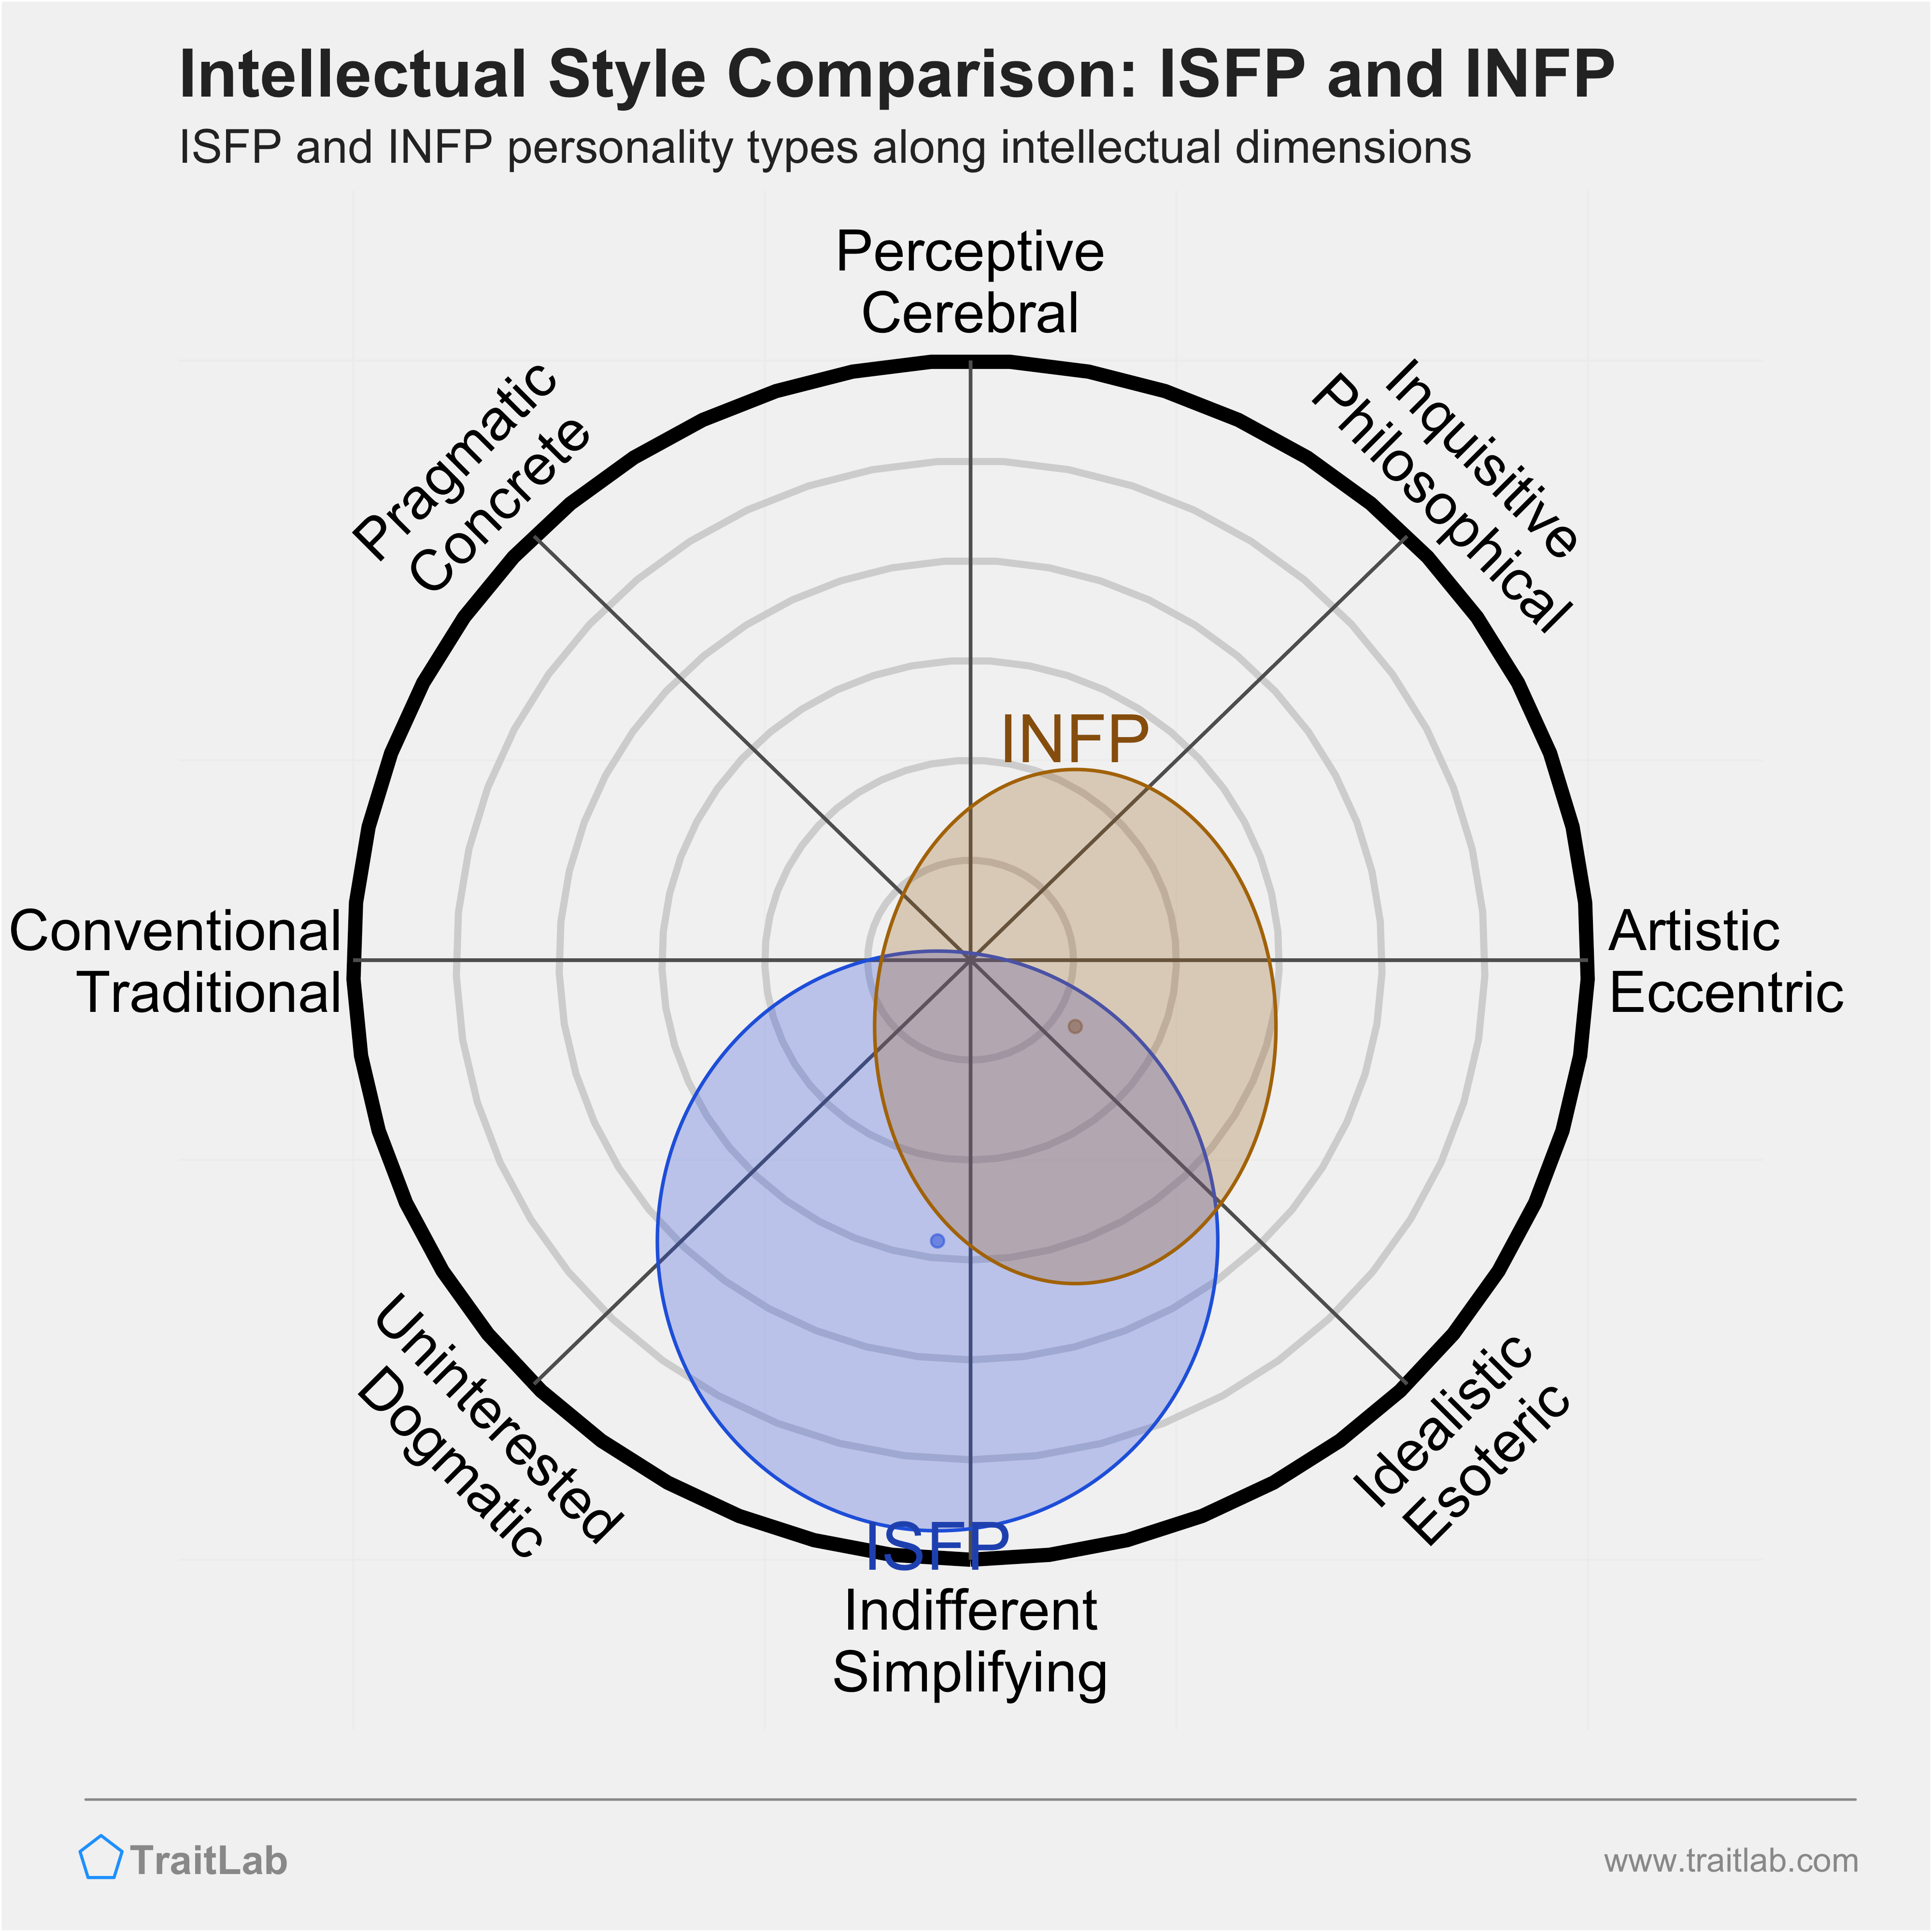 ISFP and INFP comparison across intellectual dimensions